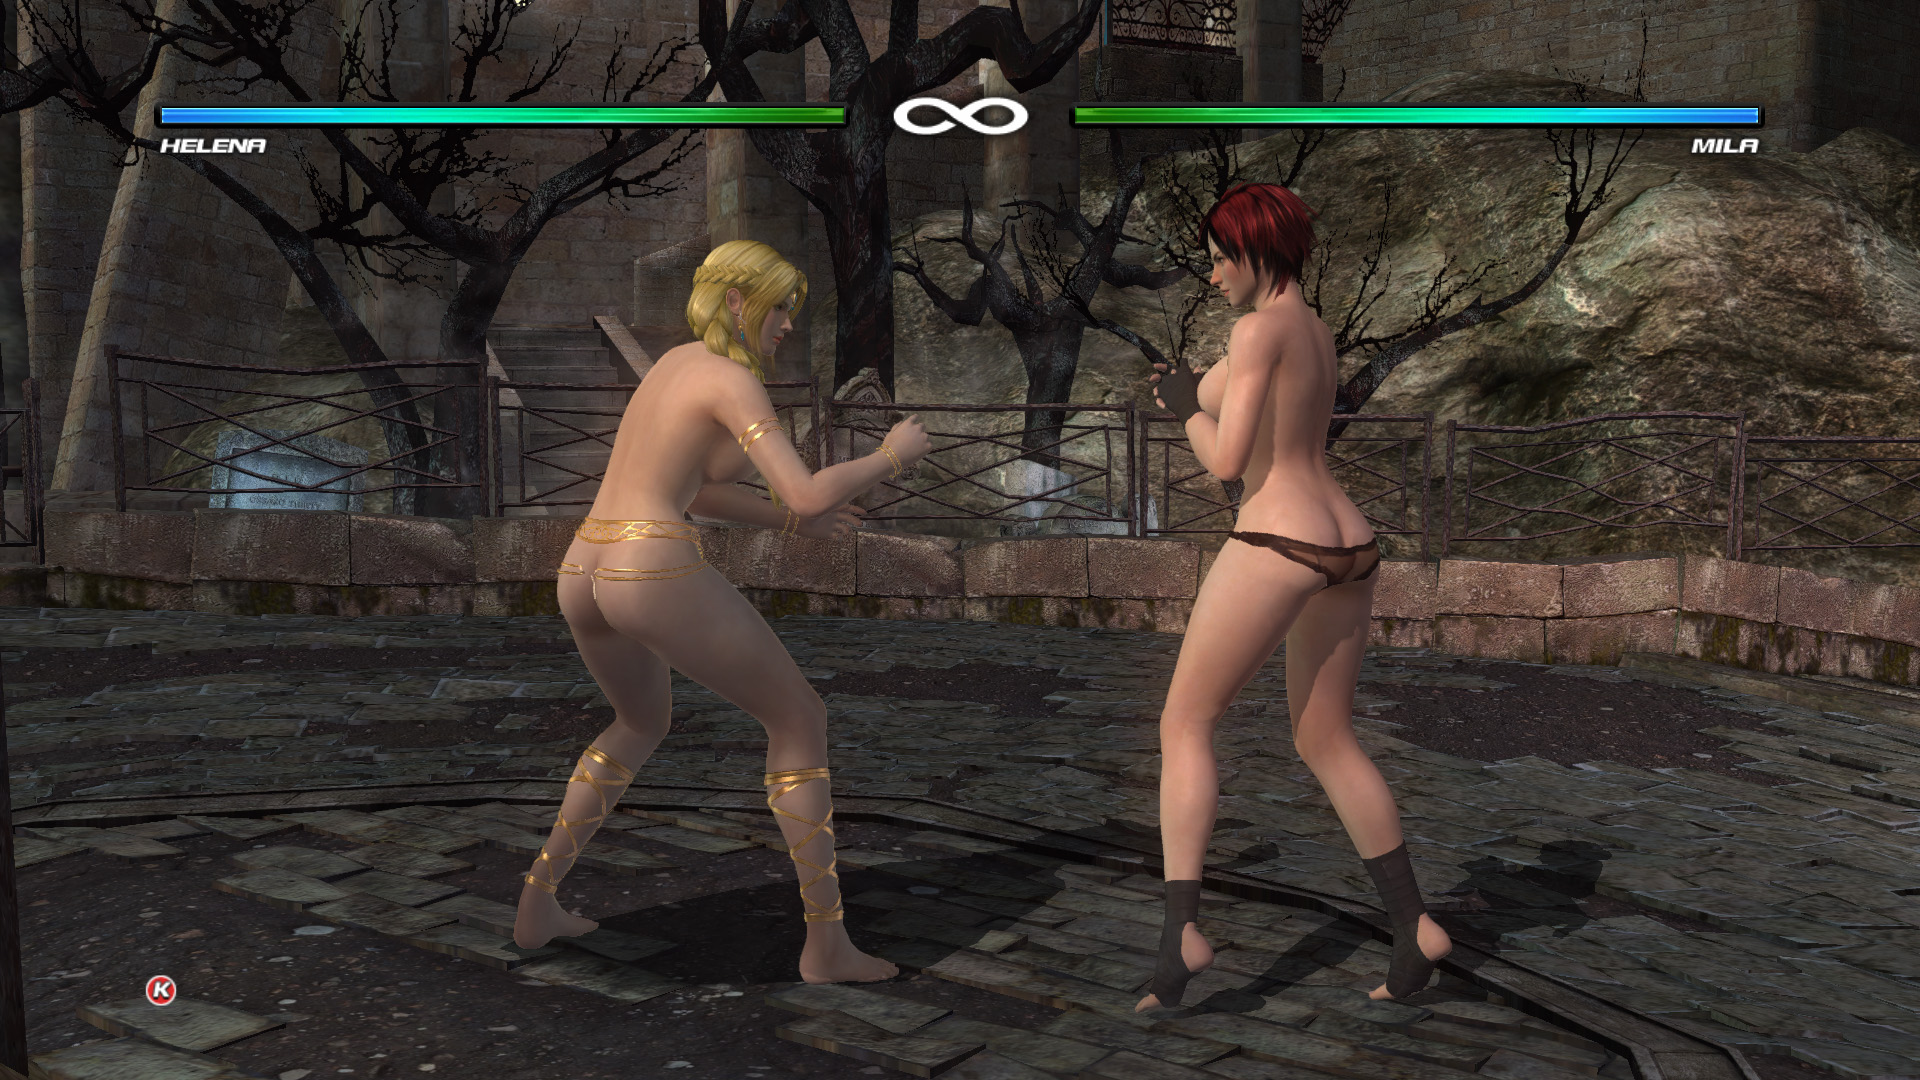 and mila improved nude mod adult gaming pic, download doa5 lr helena and mi...